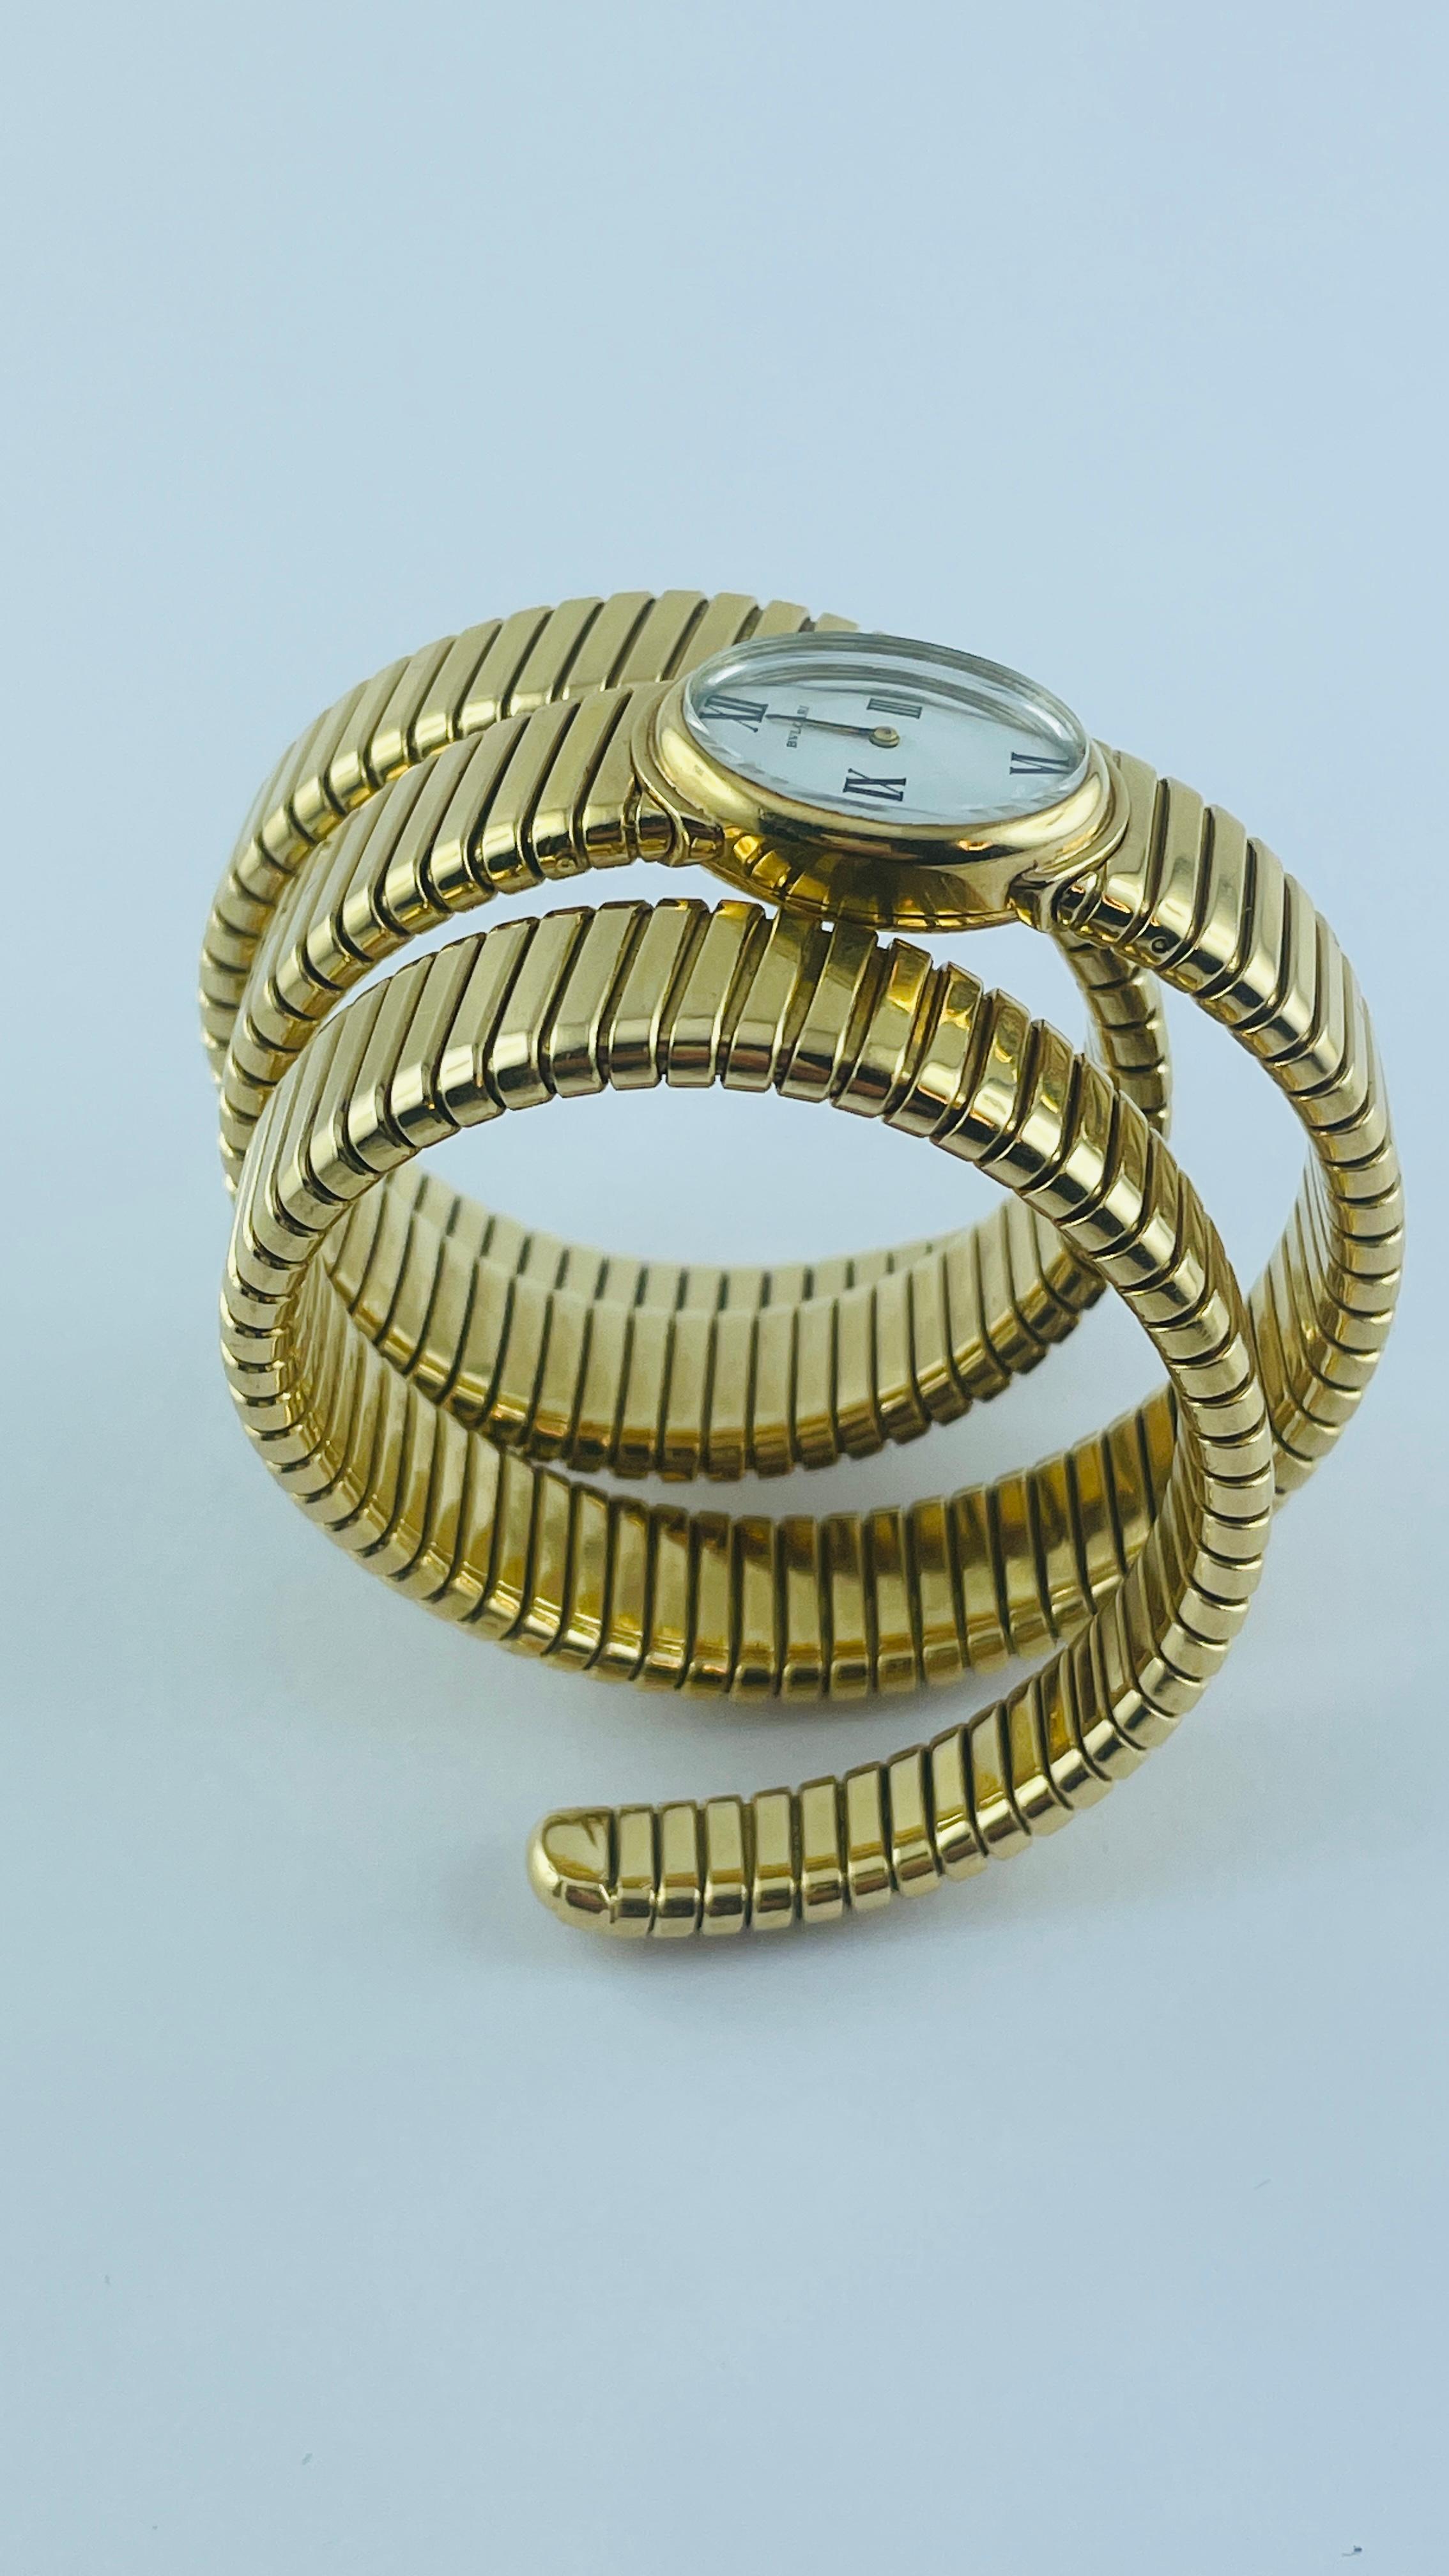 A unique version of the Bulgari Tubogas lady's watch in 18kt yellow gold with oval central movement, white dial and roman index. Those version of the Tubogas by Bulgari are among the rarest and most collectibles. Perfect conditions.
